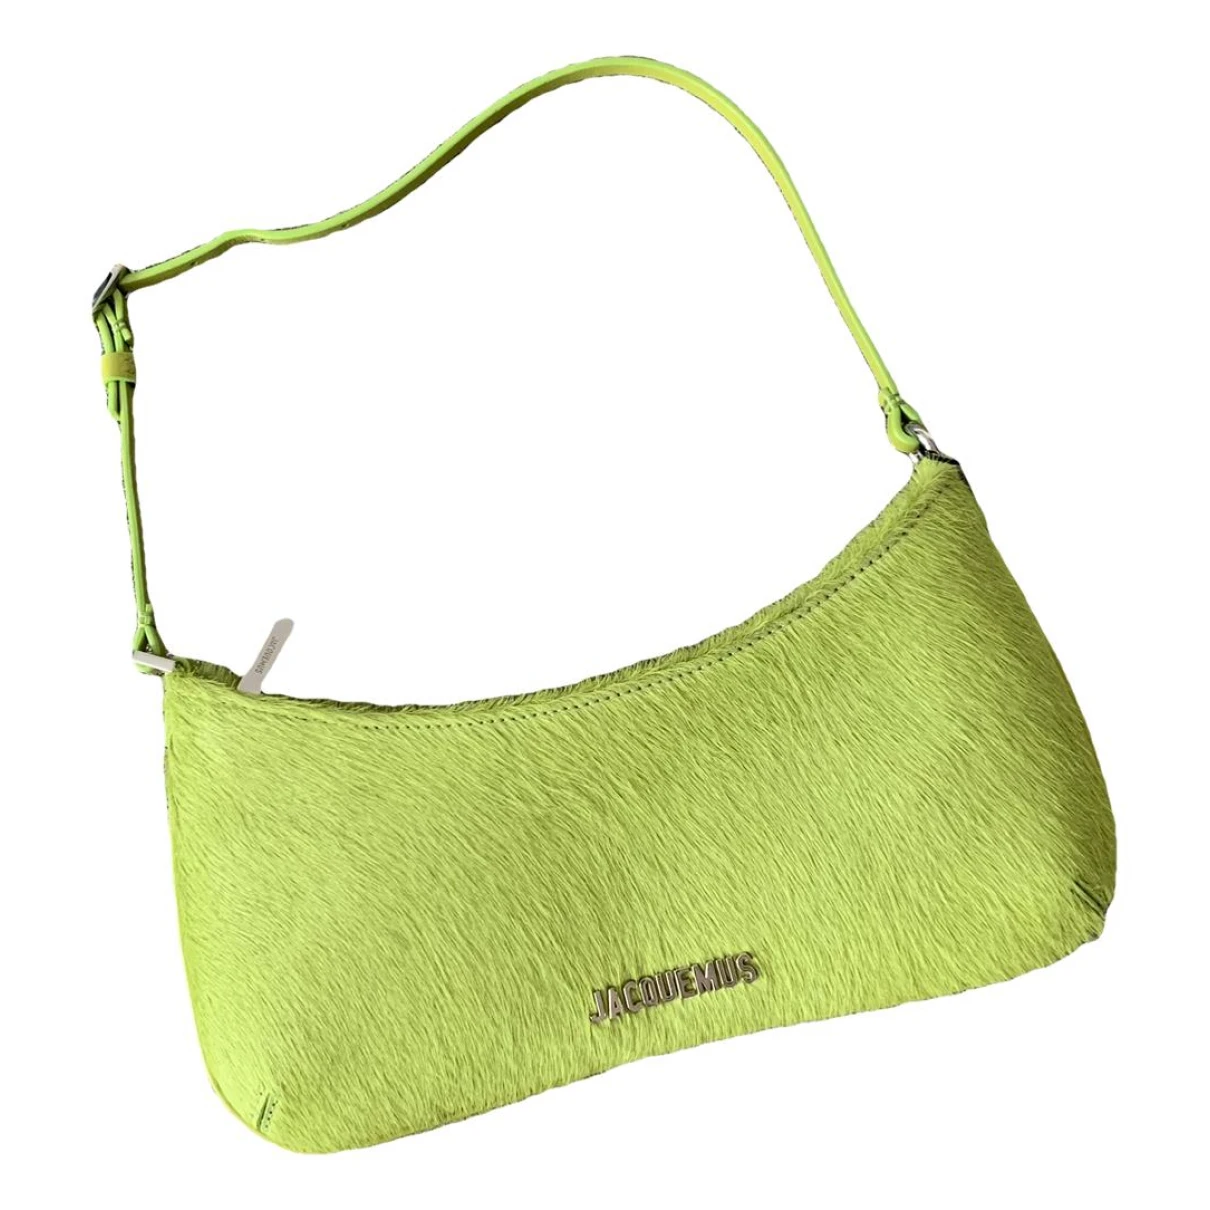 Pre-owned Jacquemus Leather Handbag In Green